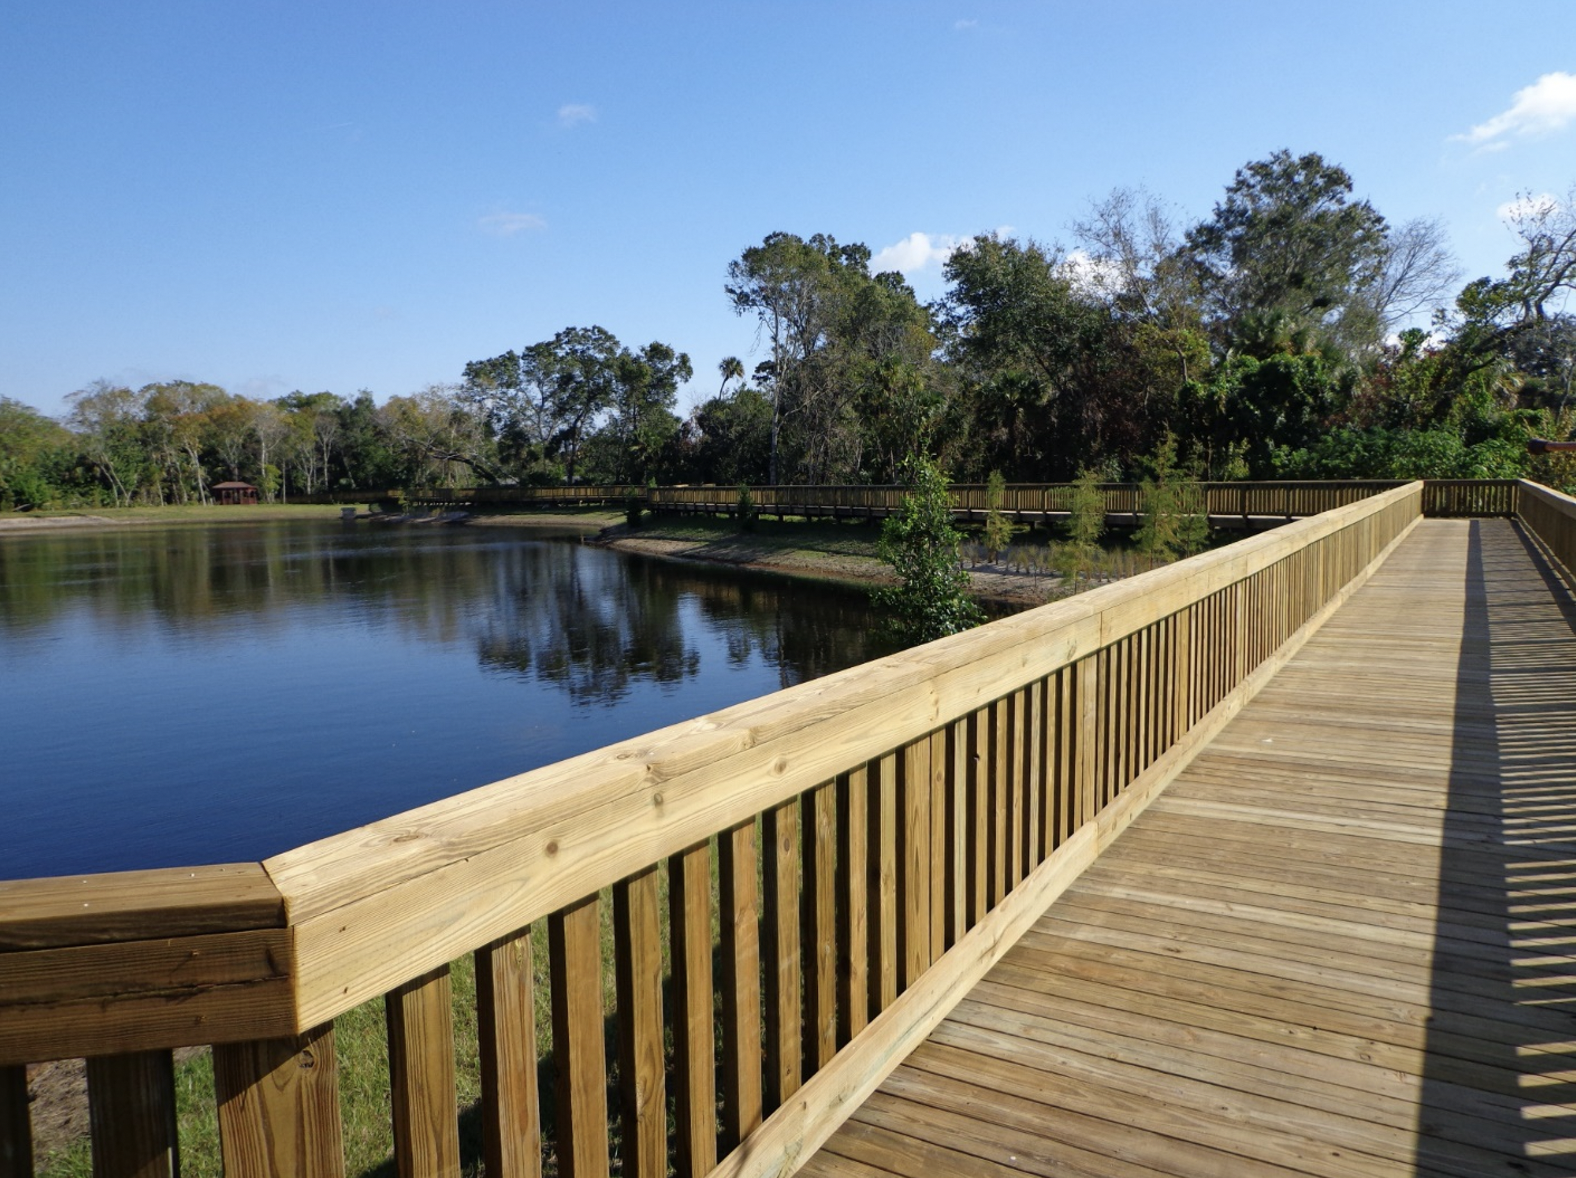 The city plans to add two boardwalks with benches overlooking the new lake. Image courtesy of the city of Palm Coast